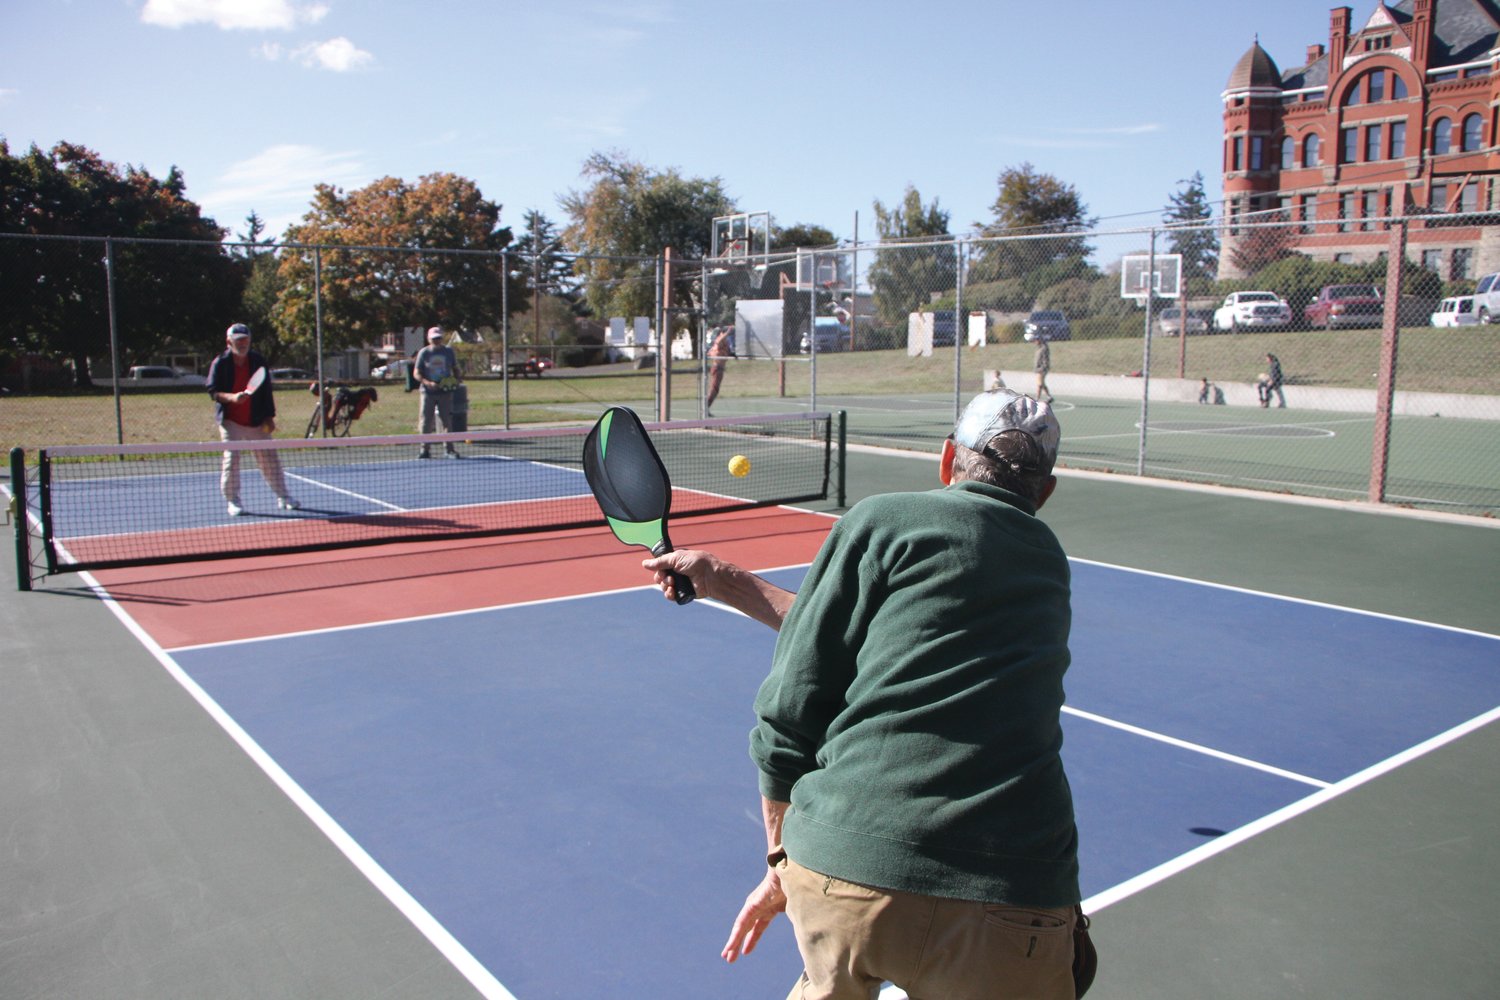 Monday afternoon at the pickleball court in Courthouse Park, Tom Young smacks a pickleball over the net.